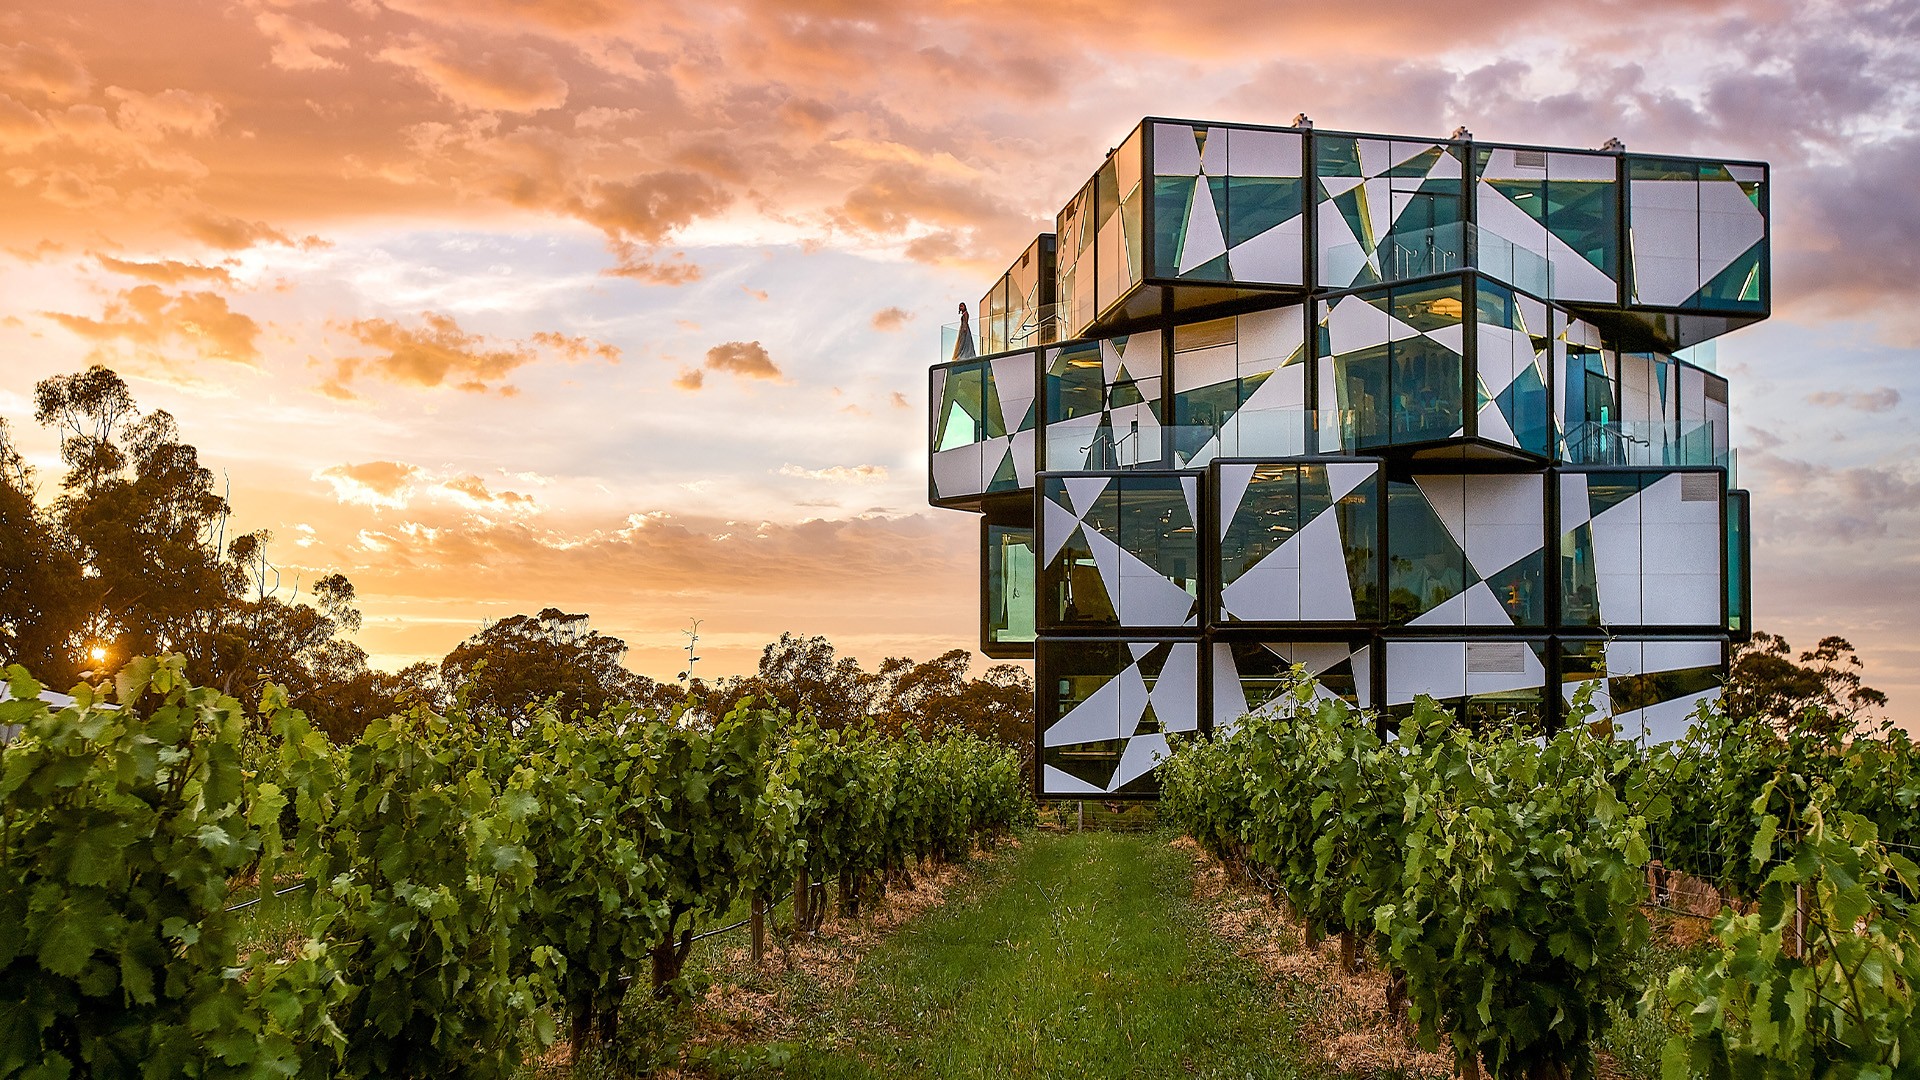  d'Arenberg Cube, image courtesy of South Australian Tourism Commission